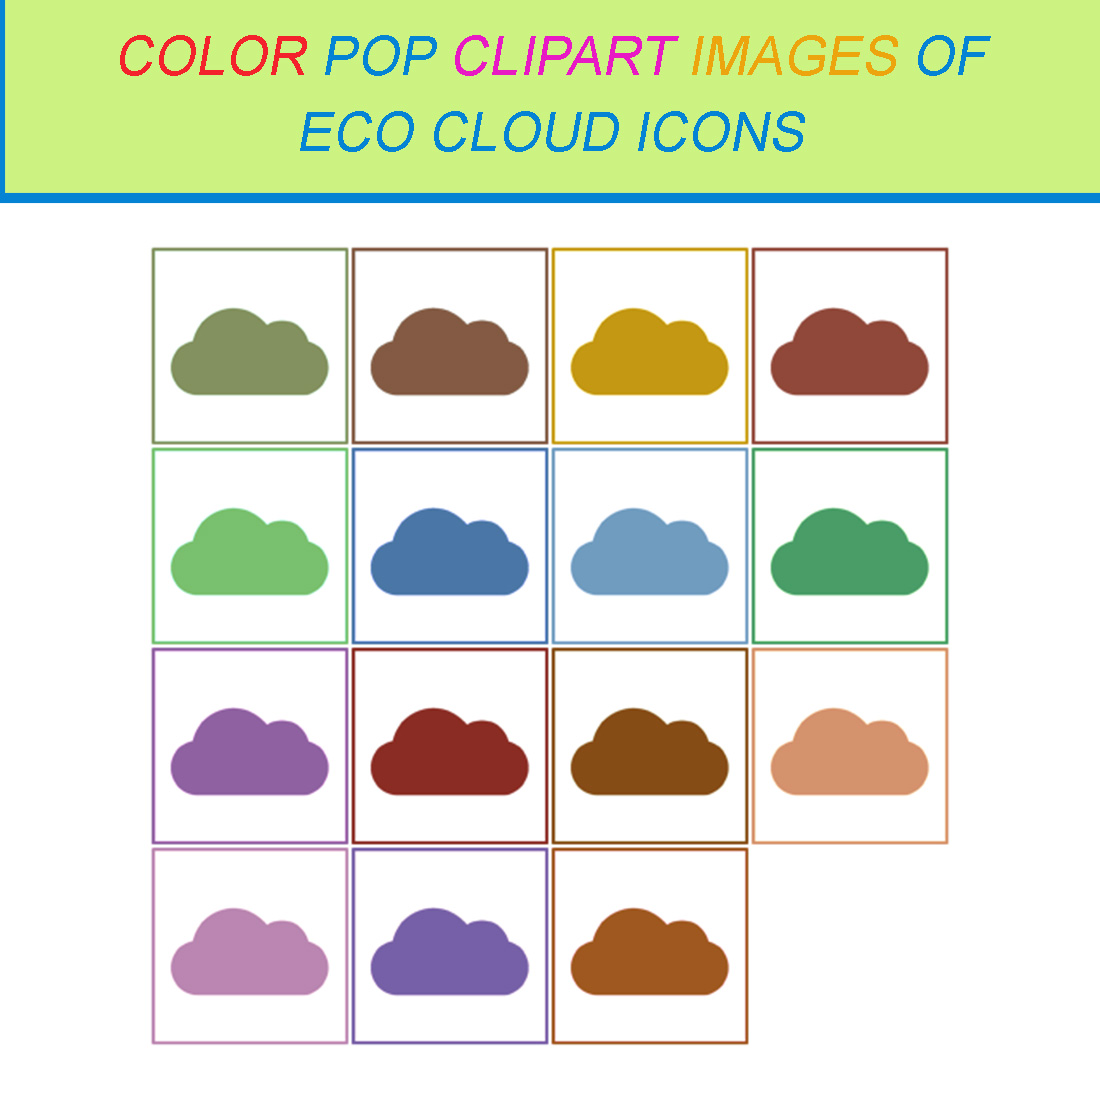 15 COLOR POP CLIPART IMAGES OF ECO CLOUD ICONS cover image.